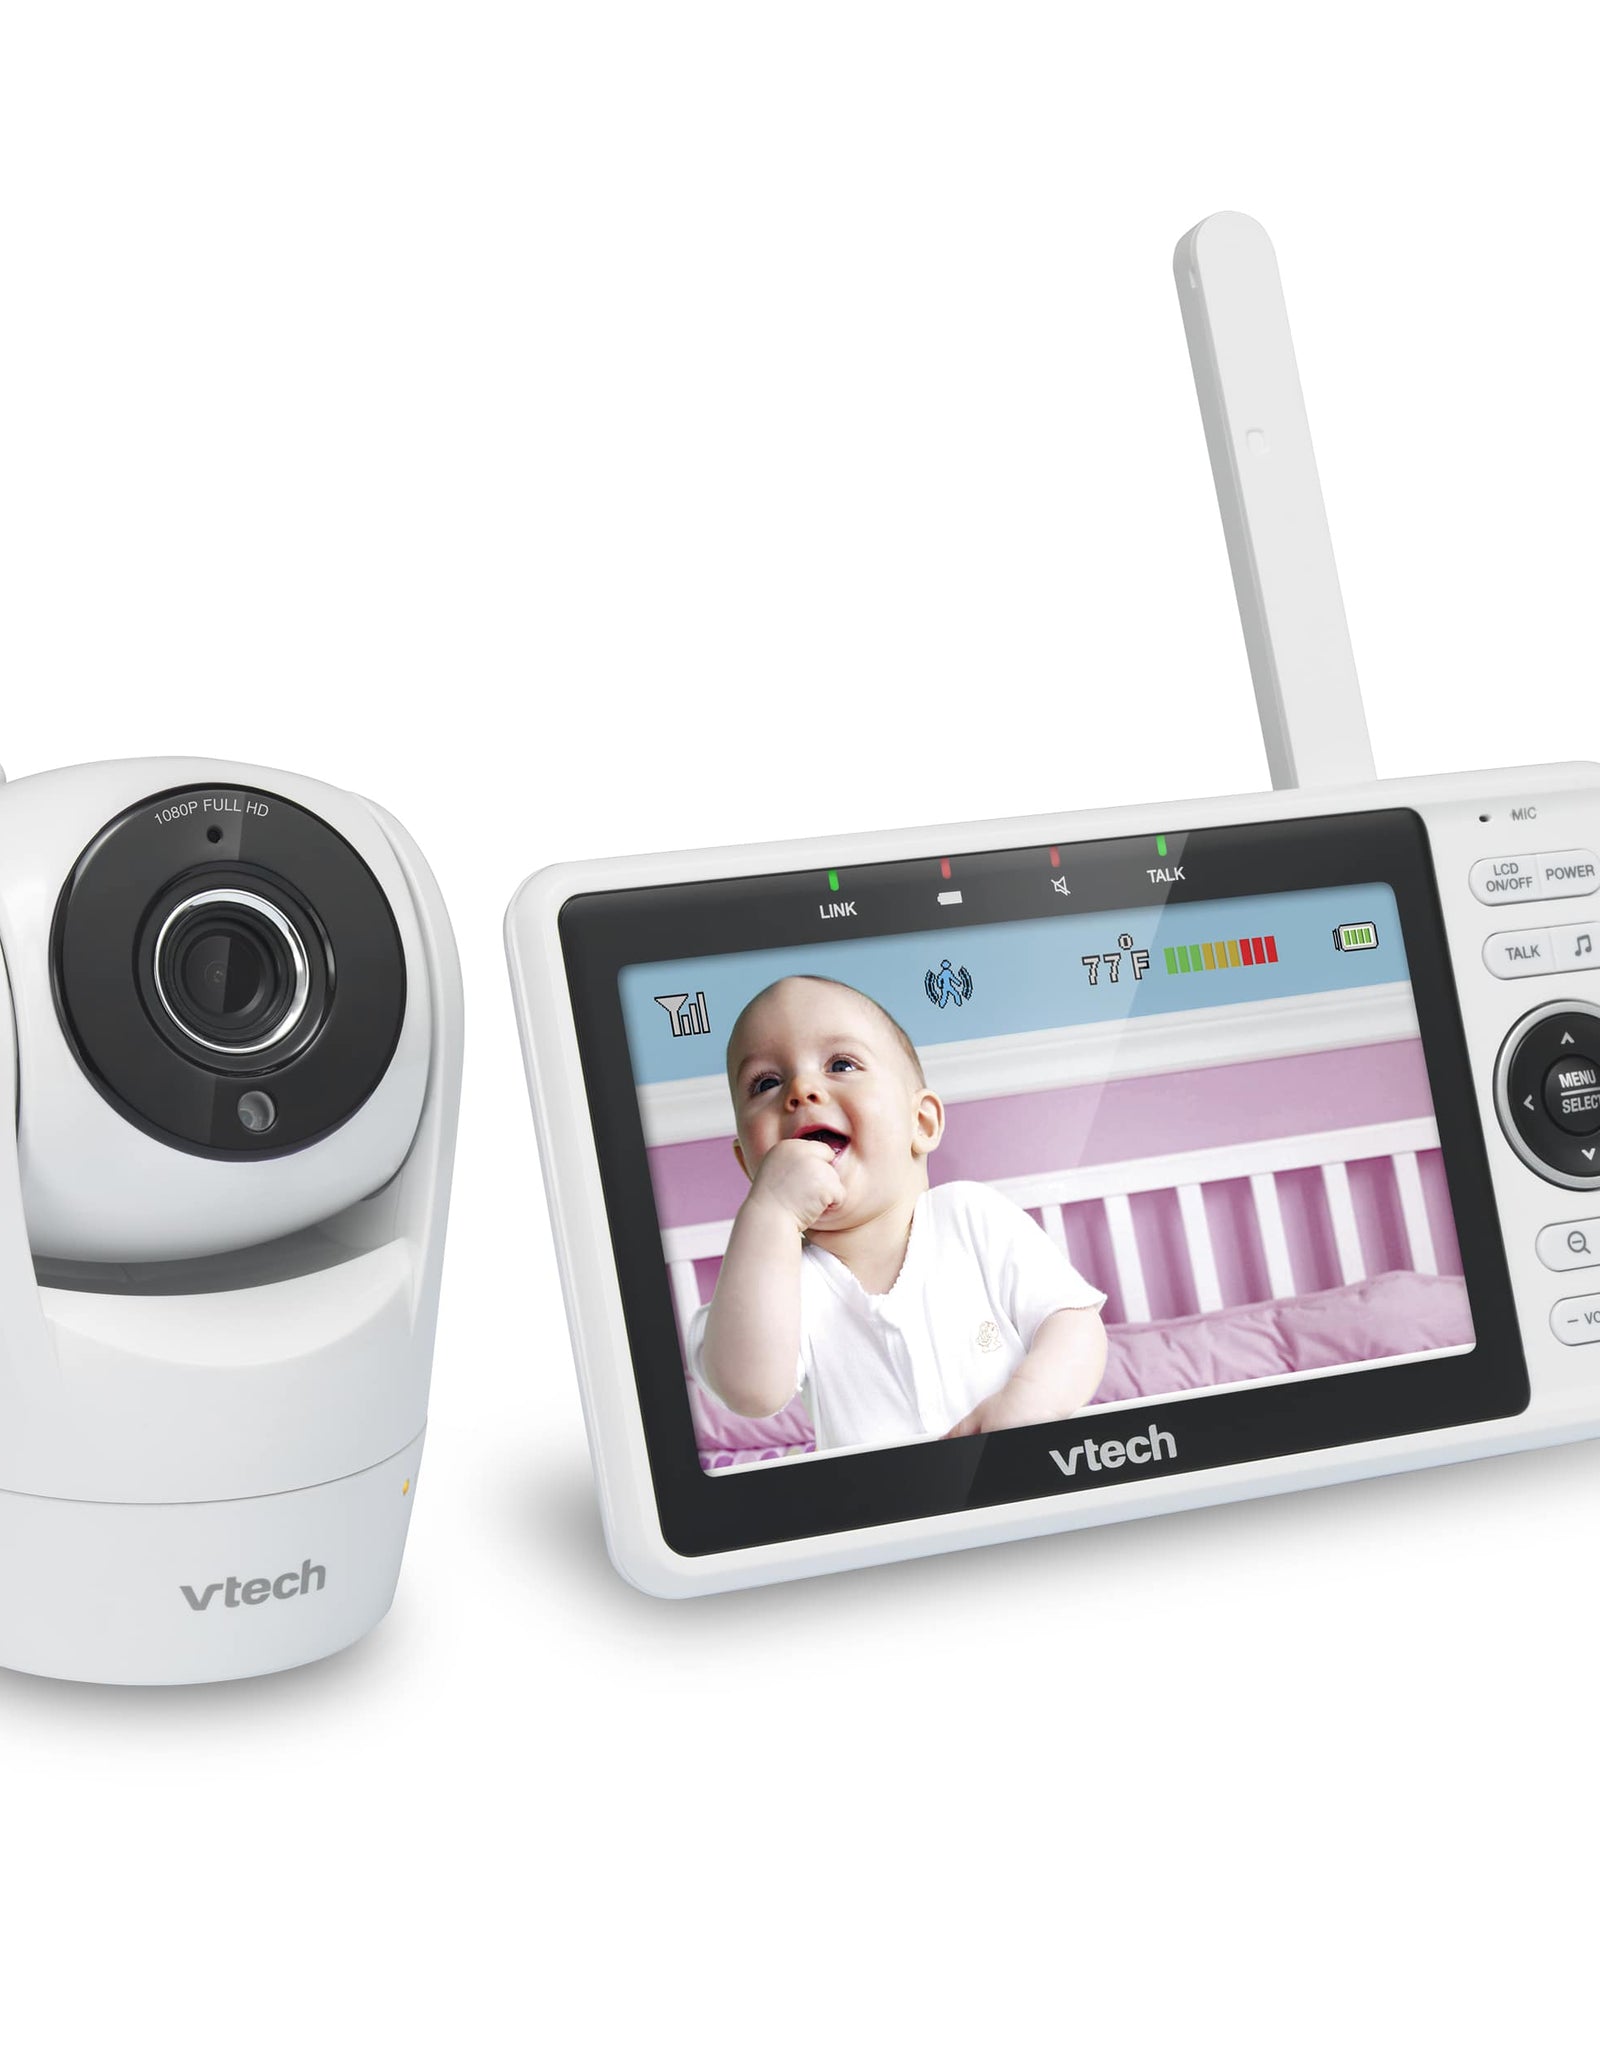 VTech Upgraded Smart WiFi Baby Monitor with 5 Inch display and 1080p HD 360 degree Pan & Tilt Camera